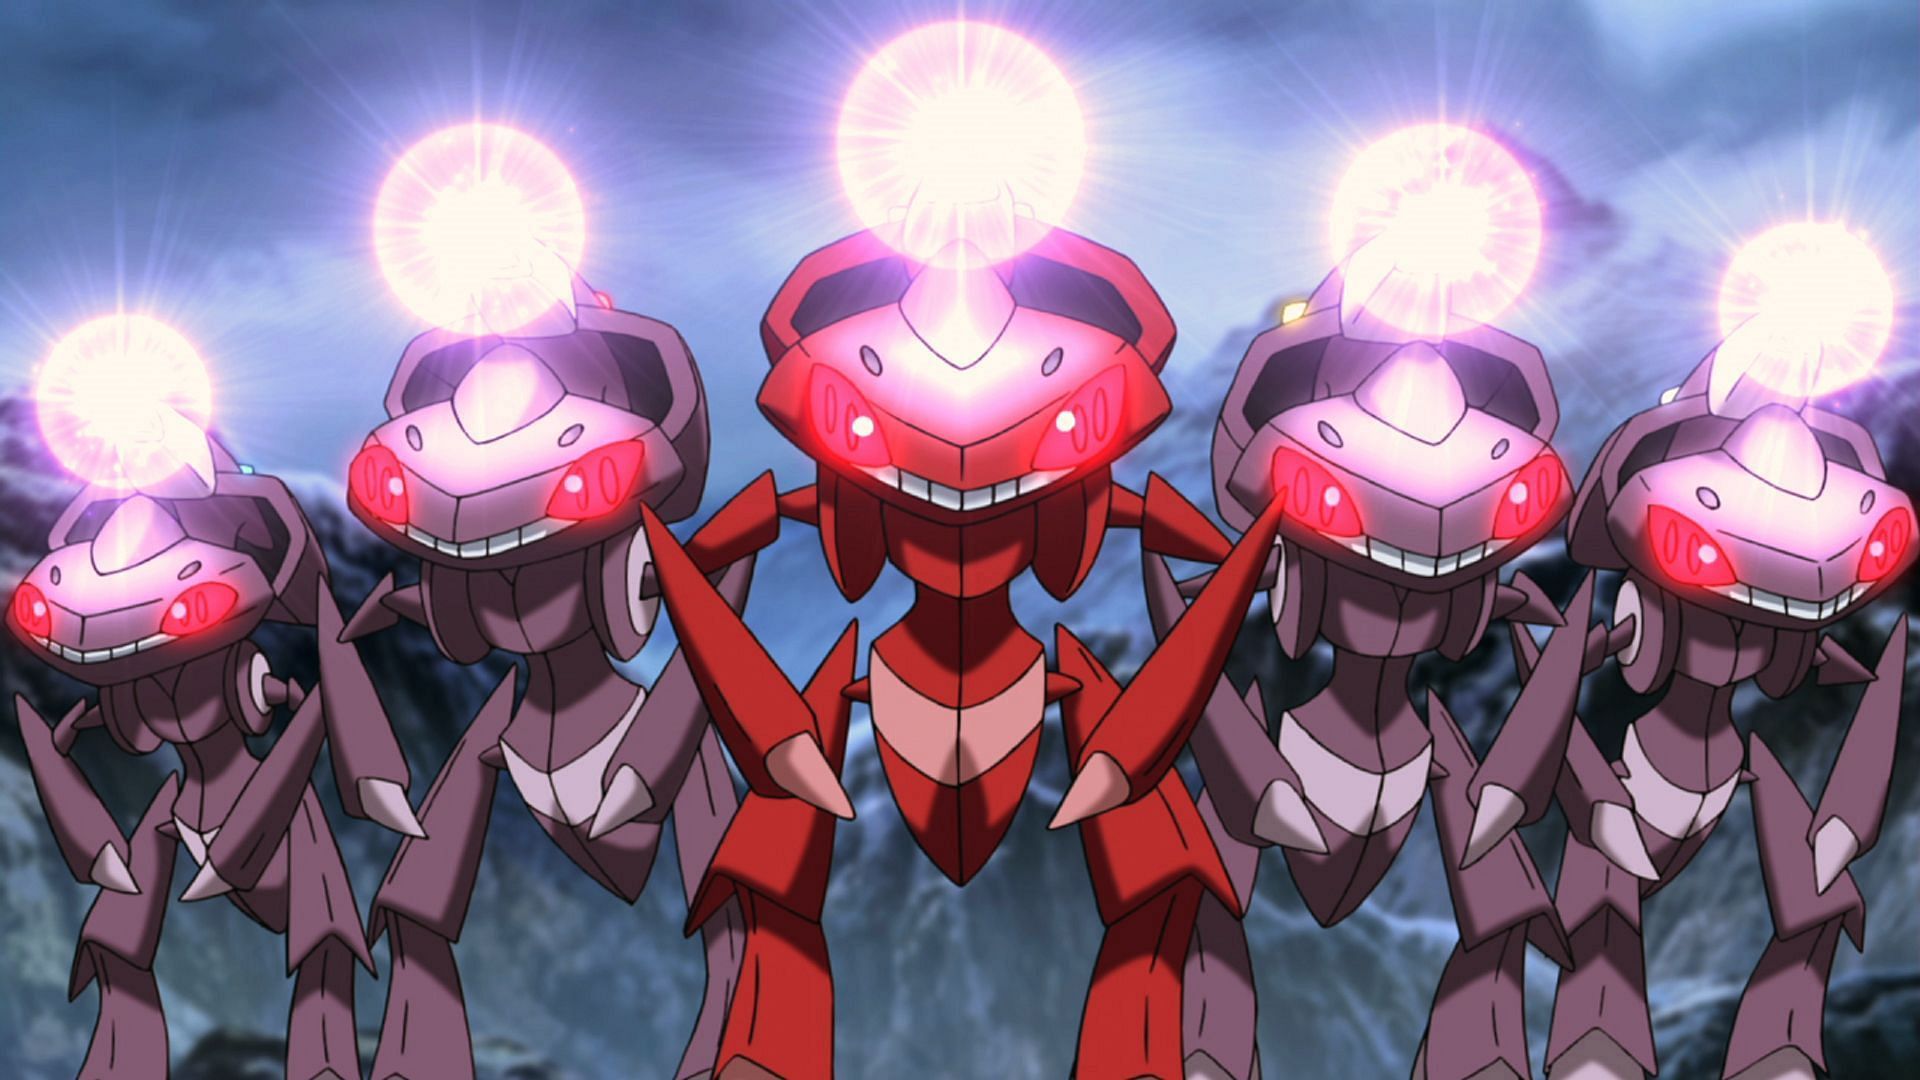 GO Battle League analysis: Does Genesect match its Mythical status